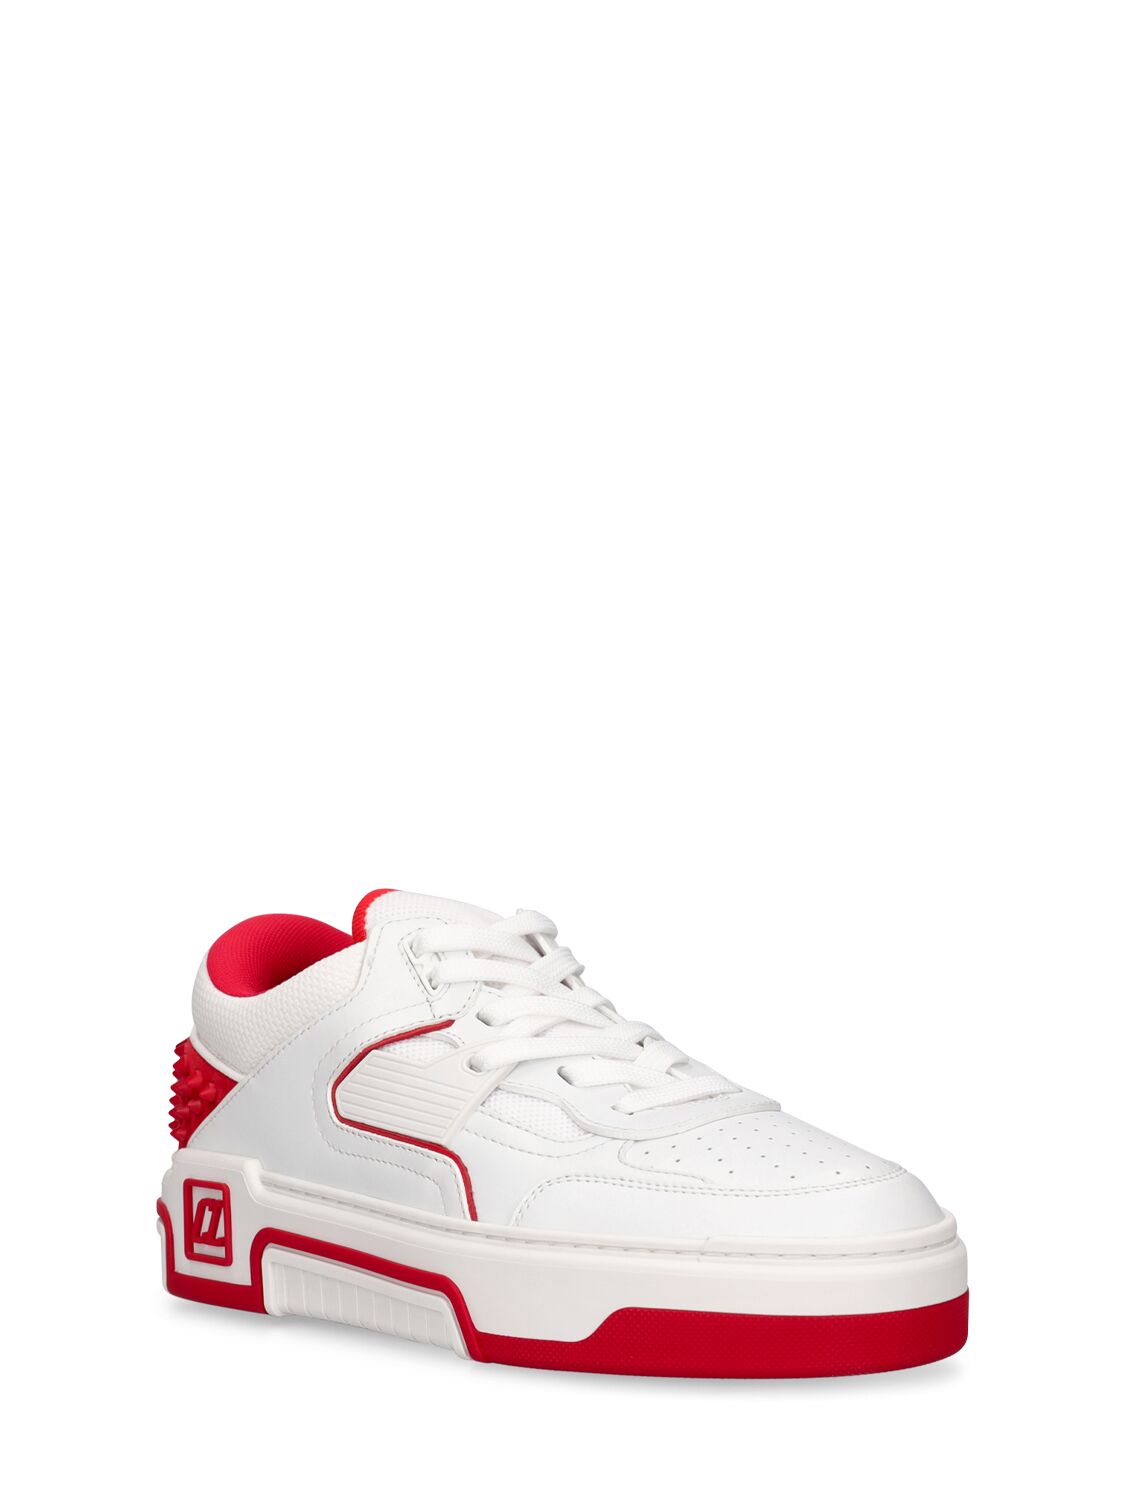 Shop Christian Louboutin Astroloubi Leather Low Top Sneakers In White,red